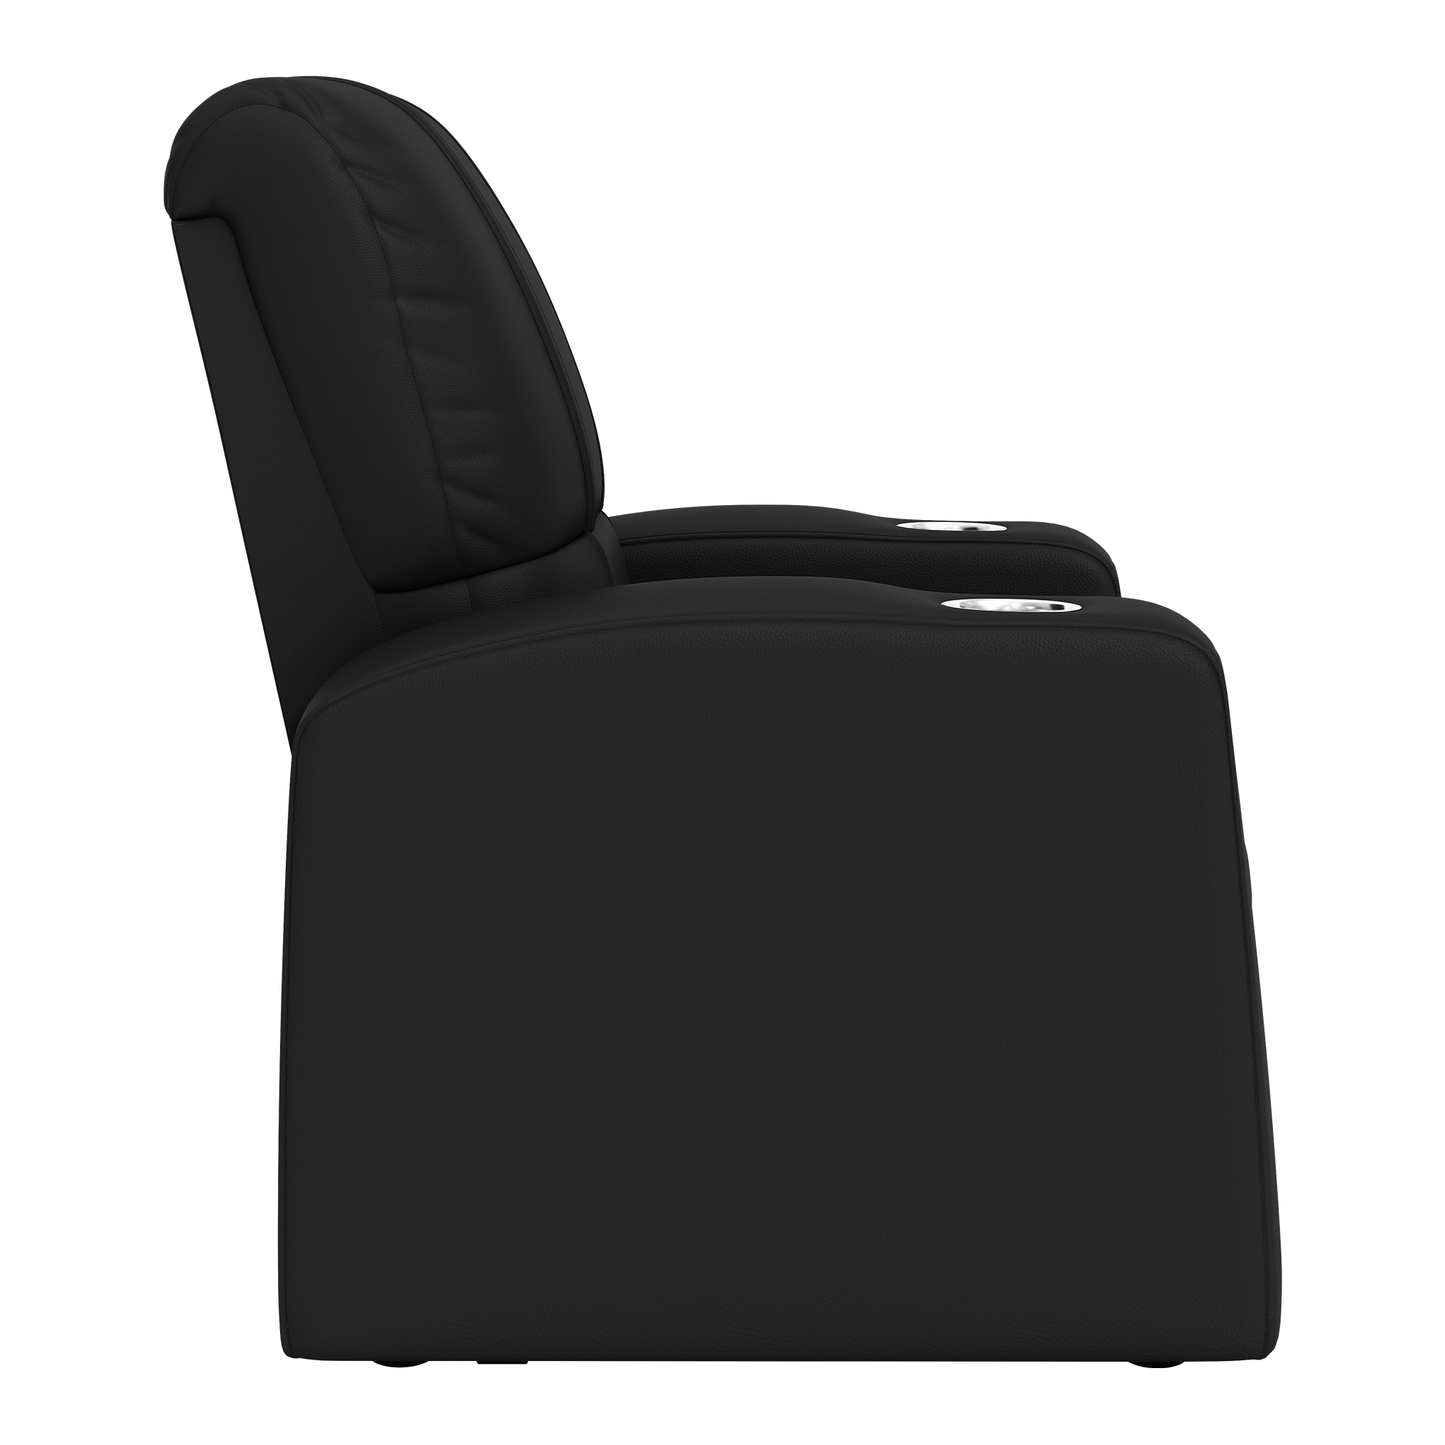 Relax Home Theater Recliner Miami Heat Logo